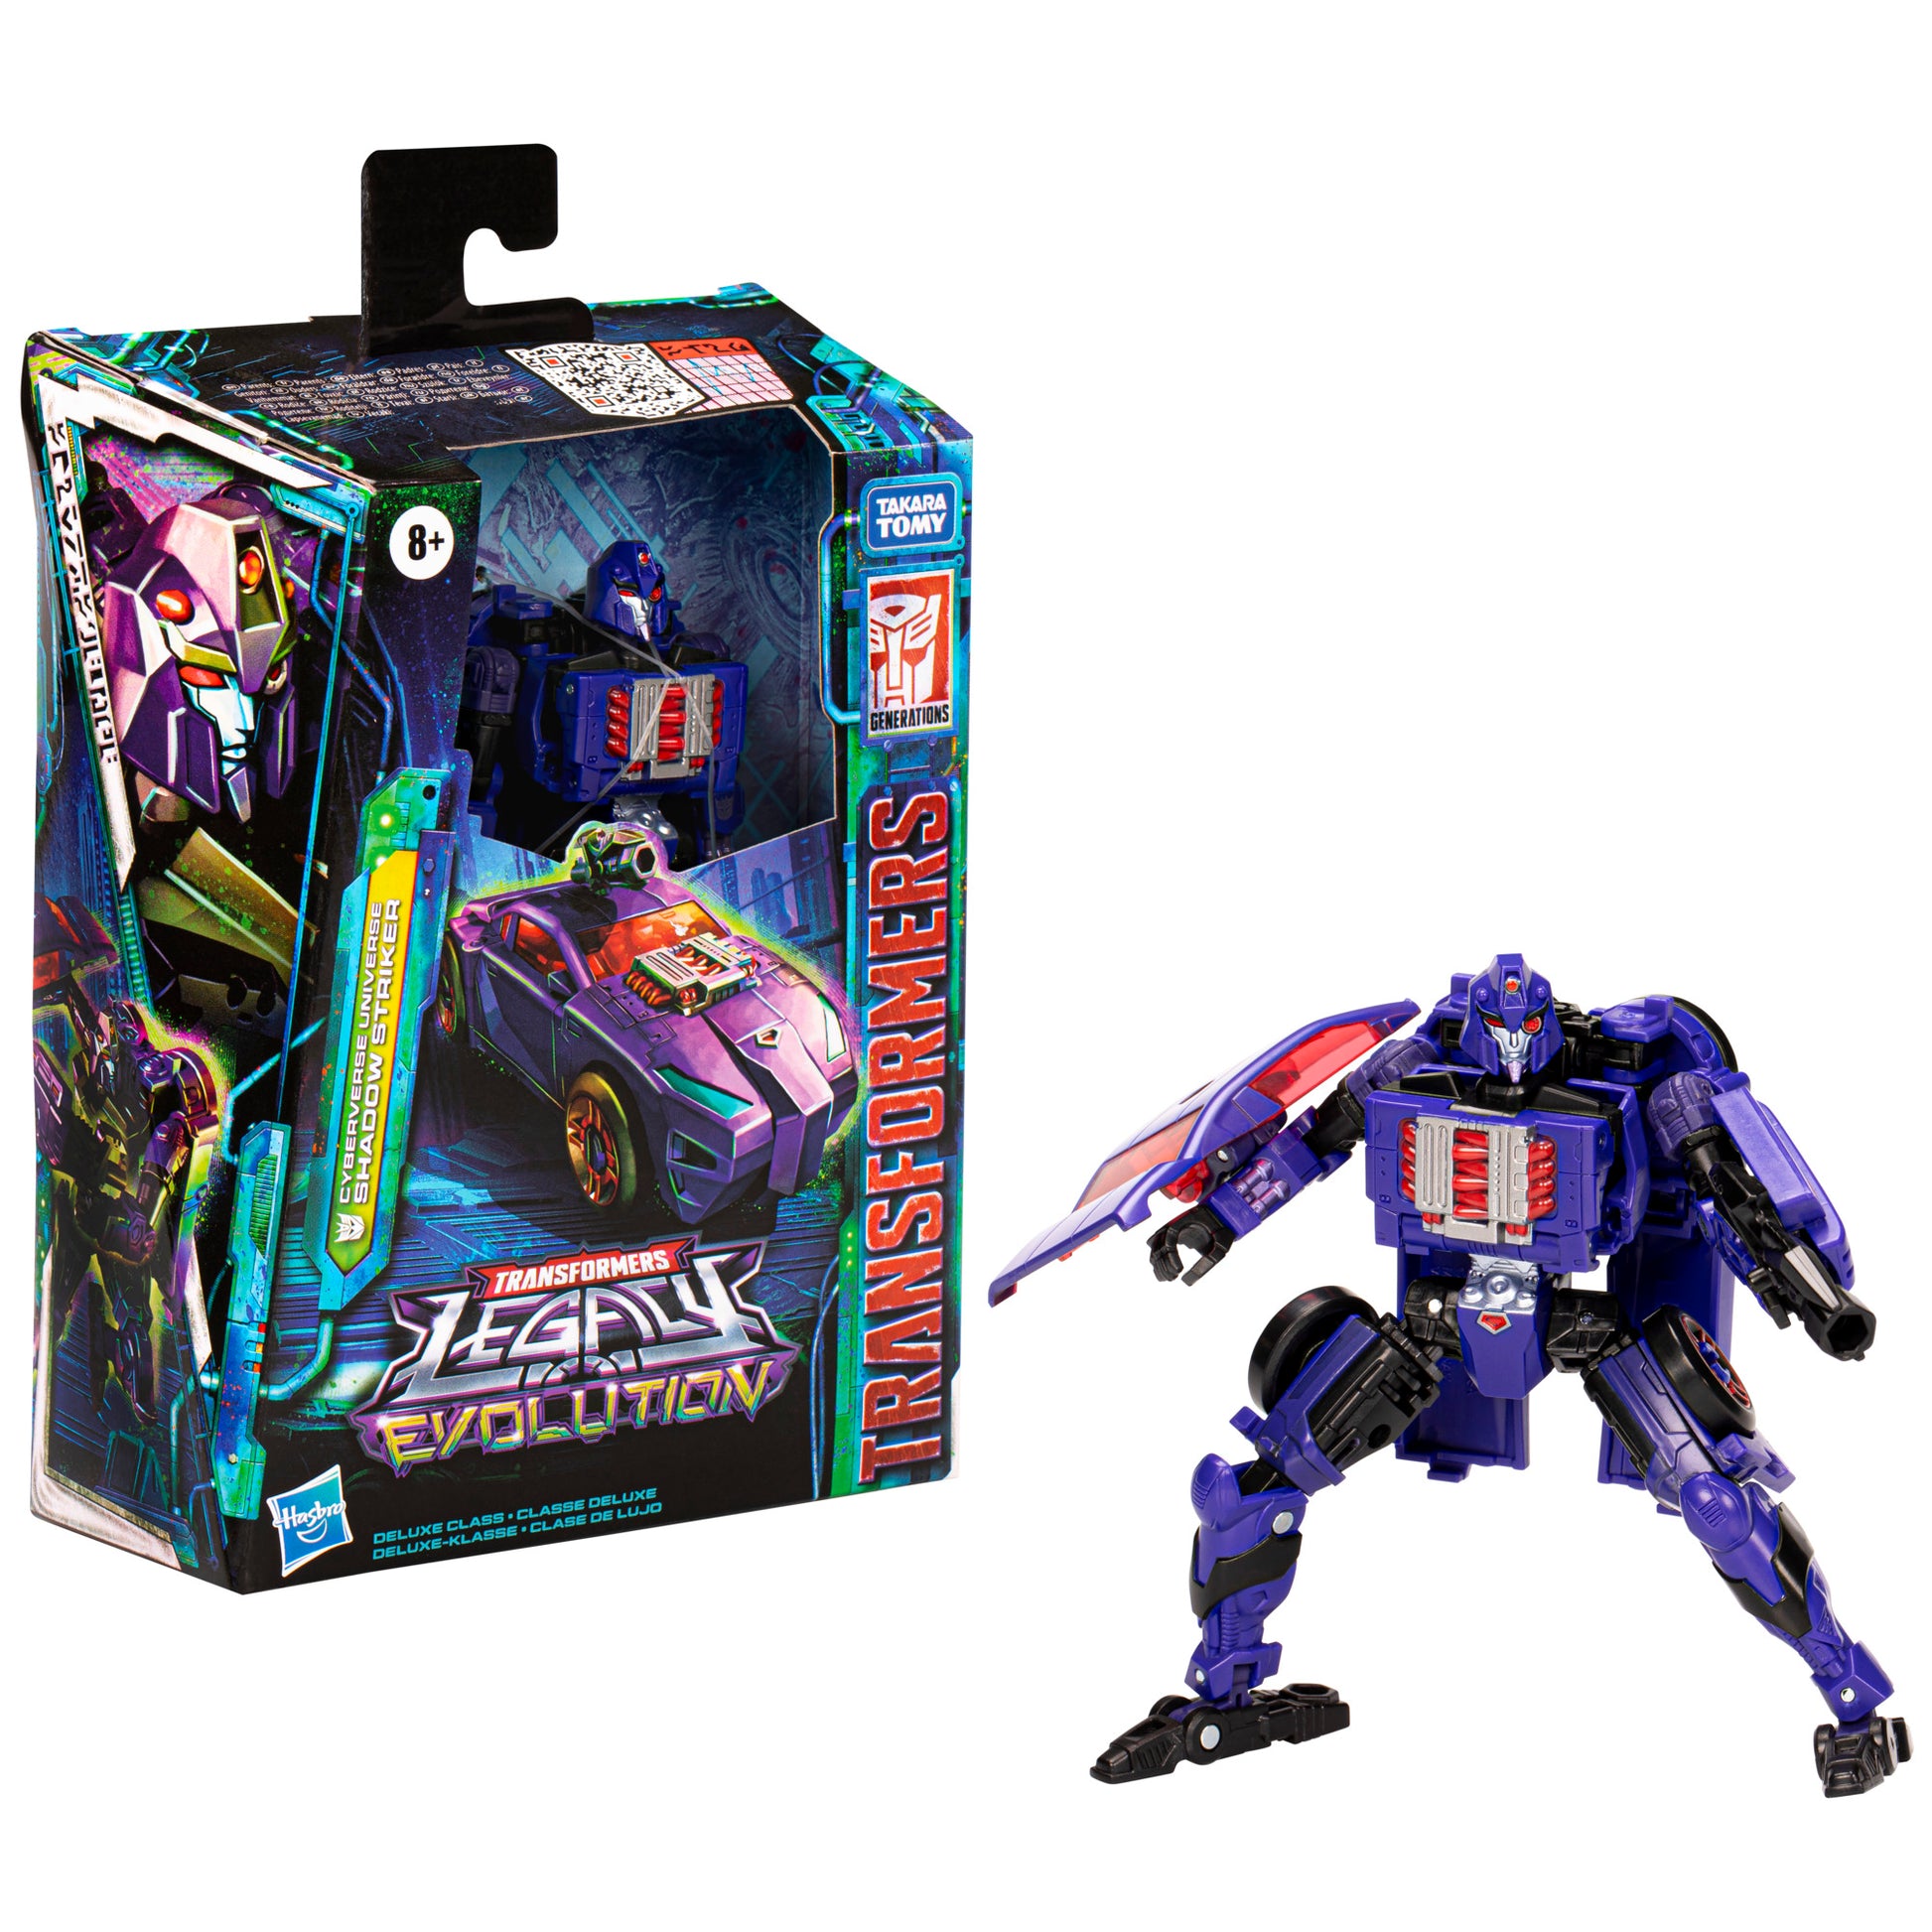 Transformers Legacy Evolution Deluxe Class Cyberverse Universe Shadow Striker Toy - Heretoserveyou